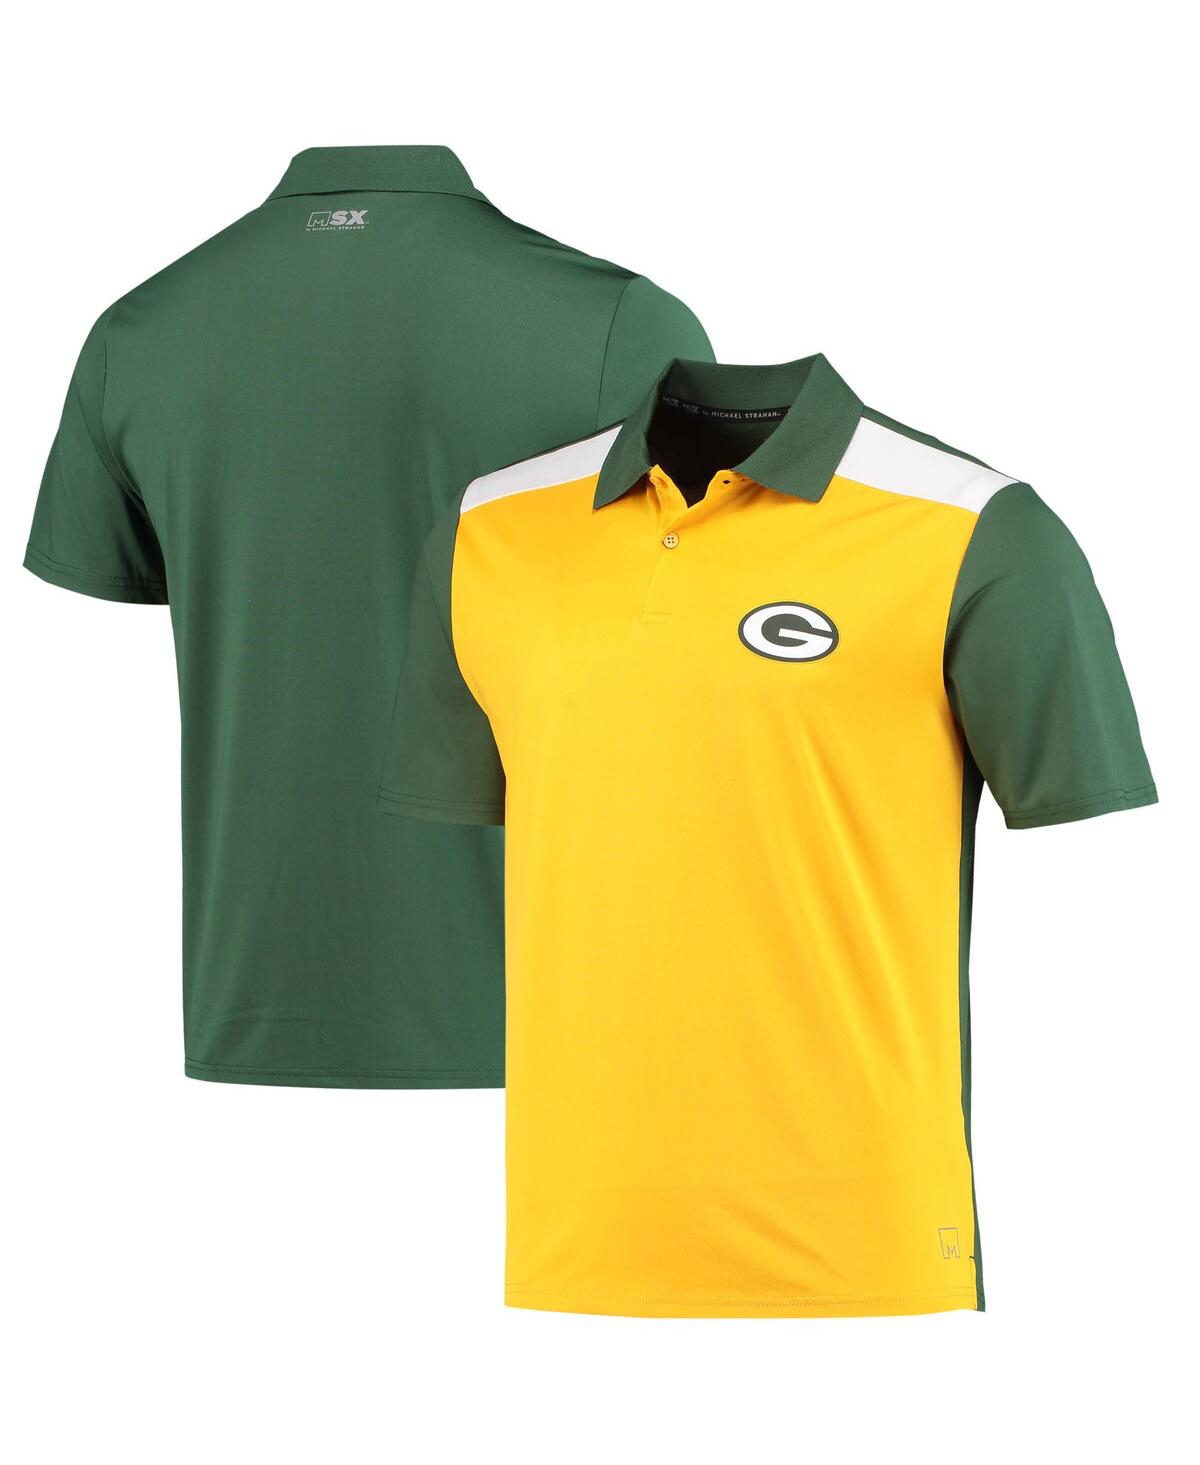 Men's Msx by Michael Strahan Gold, Green Green Bay Packers Challenge Color Block Performance Polo Shirt - Gold, Green